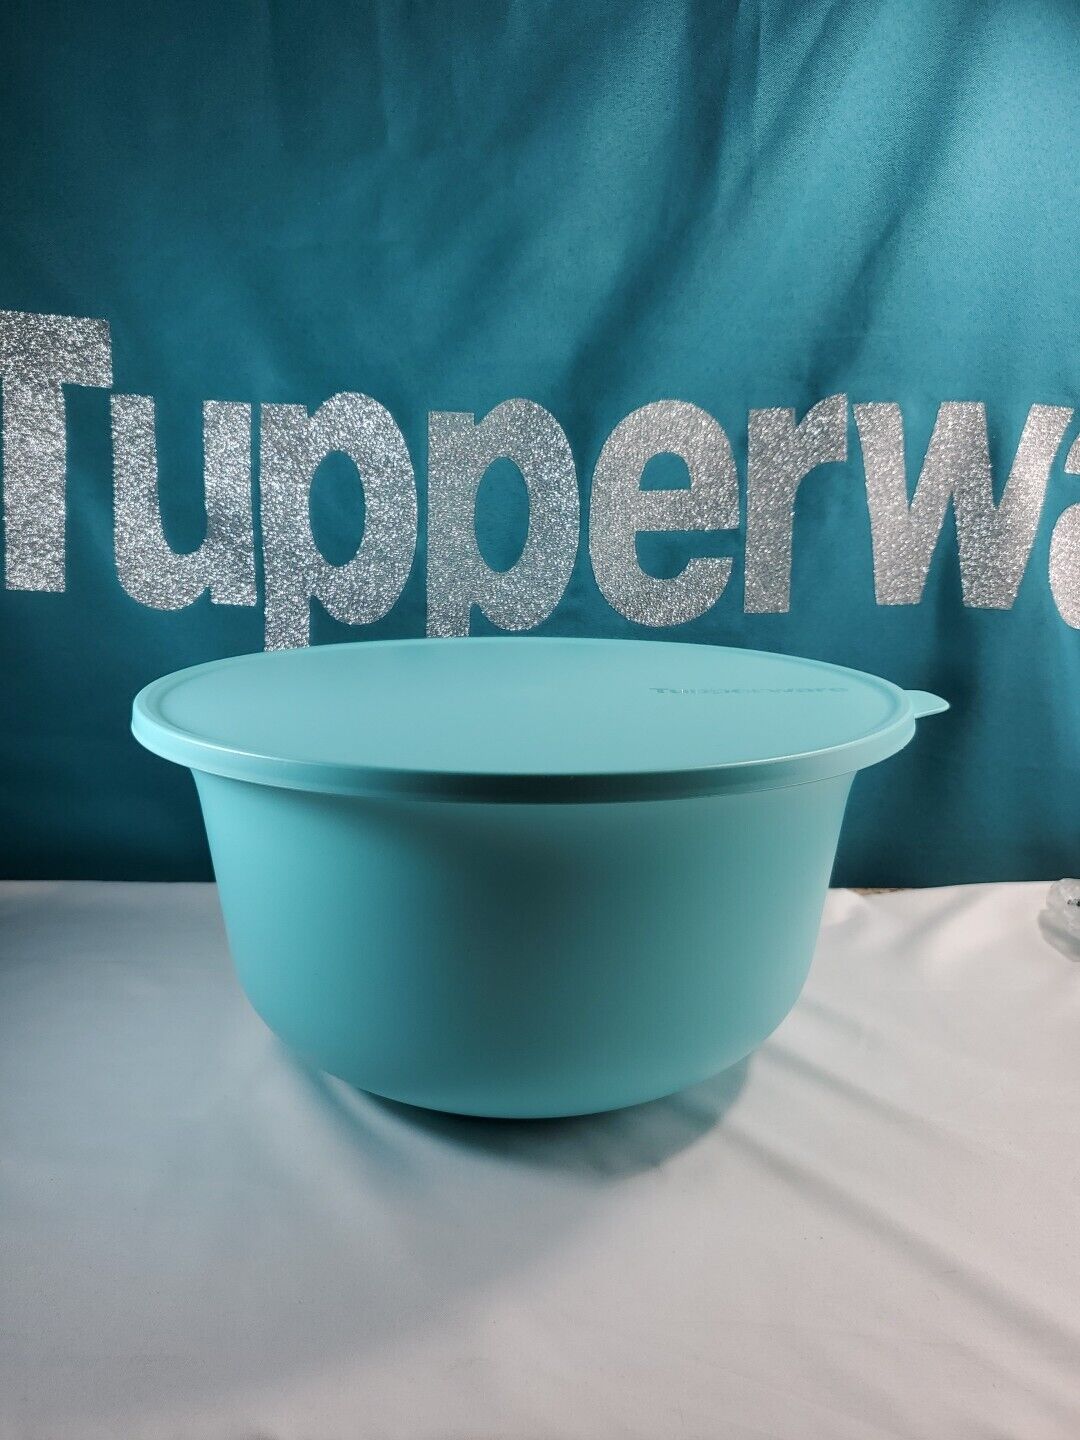 New Tupperware Aloha Bowl with Seal 31.75 cup Large Size Mint Green New Sale